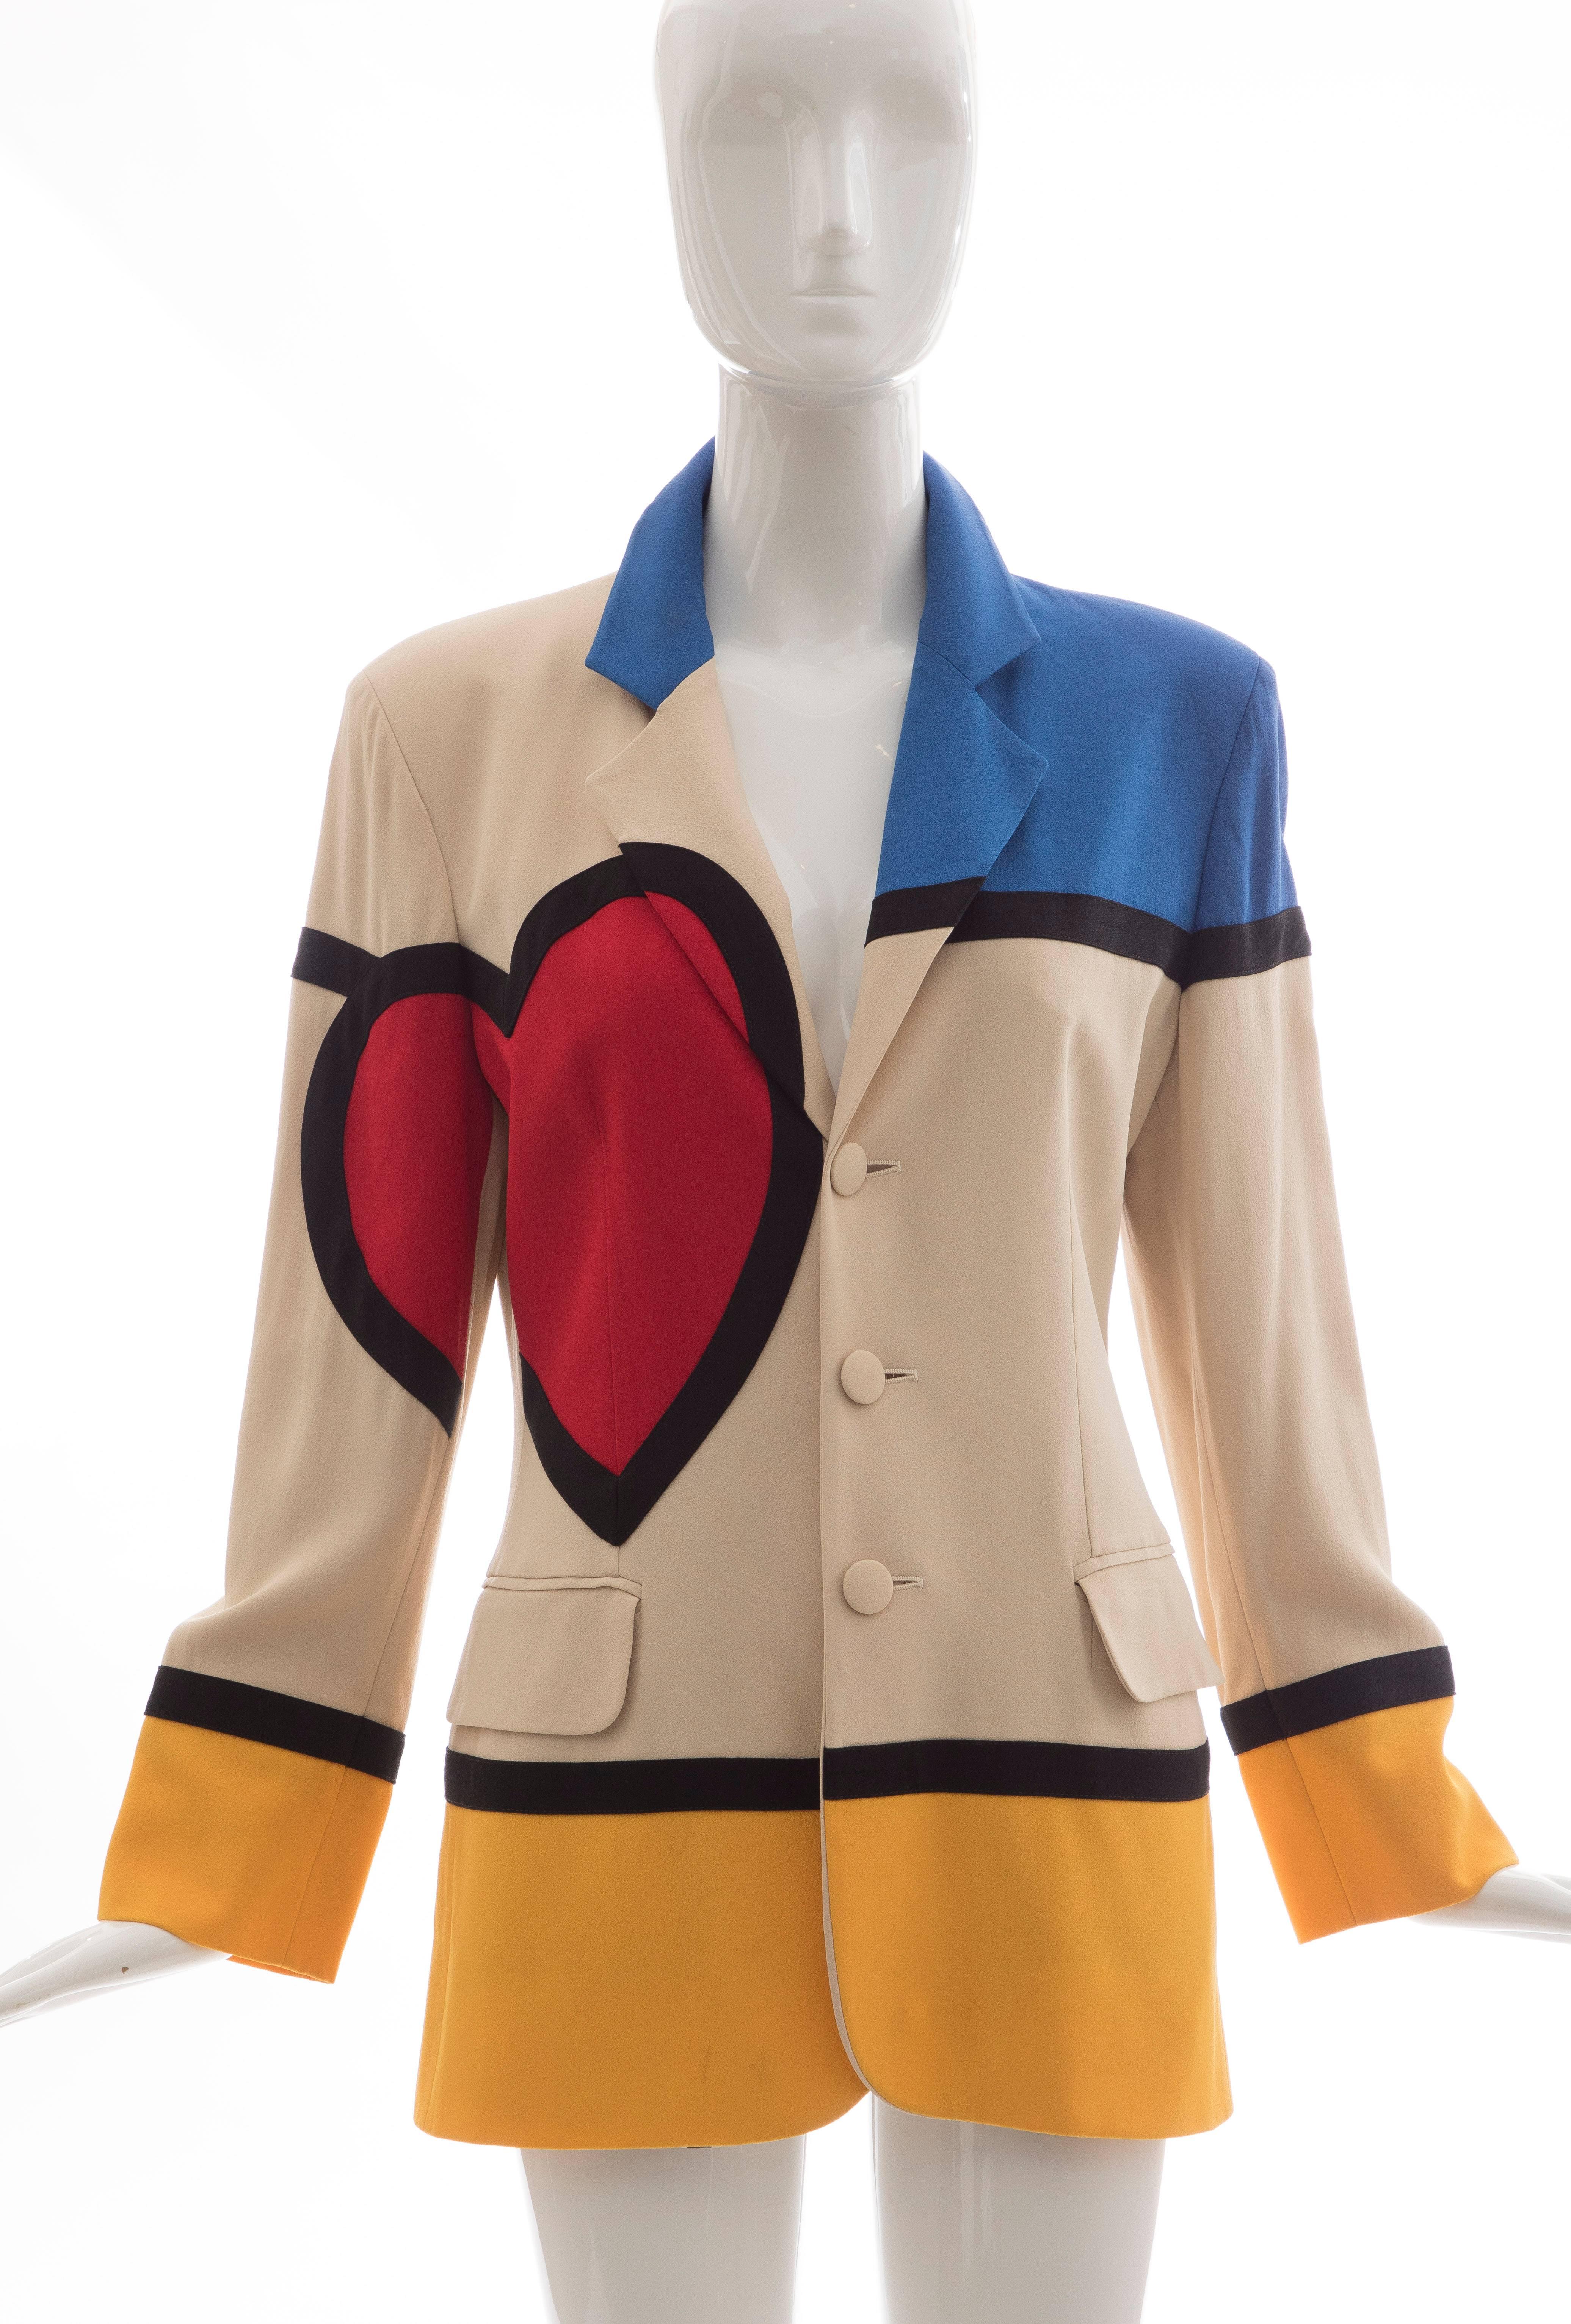 Moschino Cheap and Chic, Circa 1990's colorblock blazer with notched lapels, structured shoulders, long sleeves, Mondrian Heart at side, 'Art is Love' text at back, dual flap pockets and button closures at front.

IT. 42, US. 6

Bust: 39, Waist: 34,